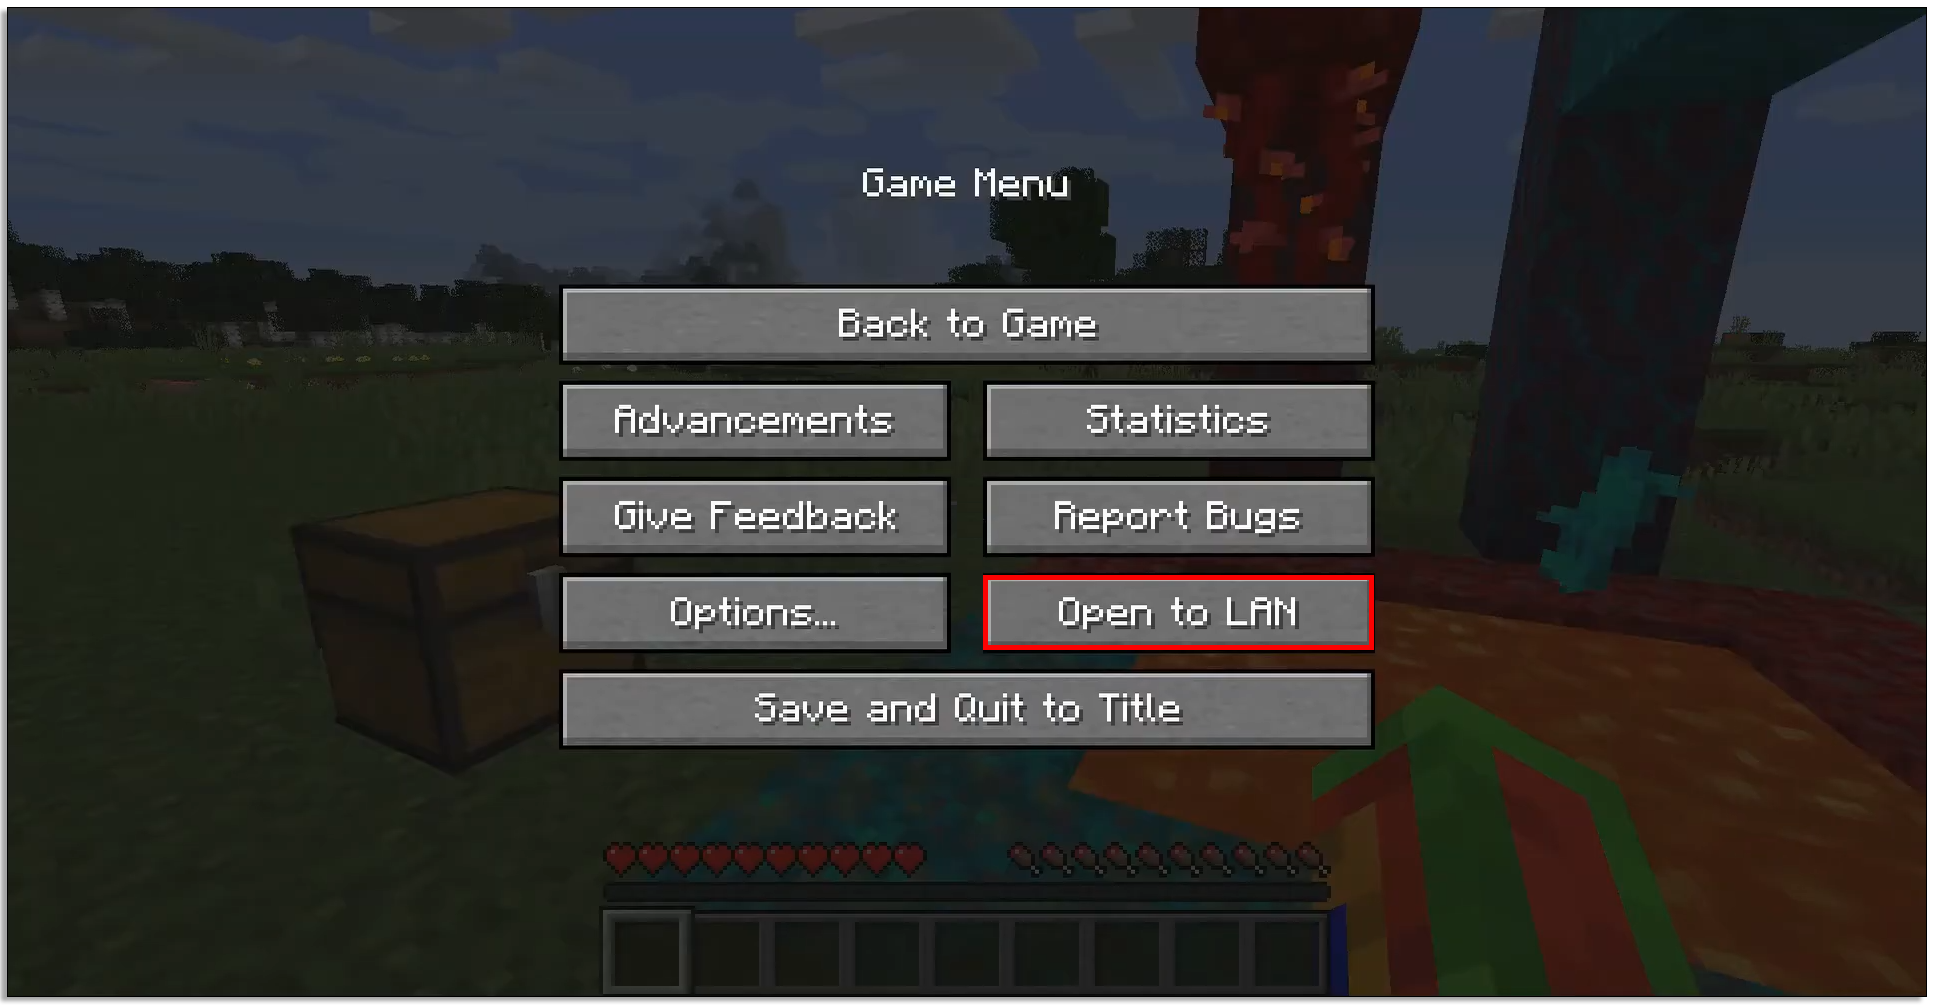 How to Keep Inventory When You Die in Minecraft